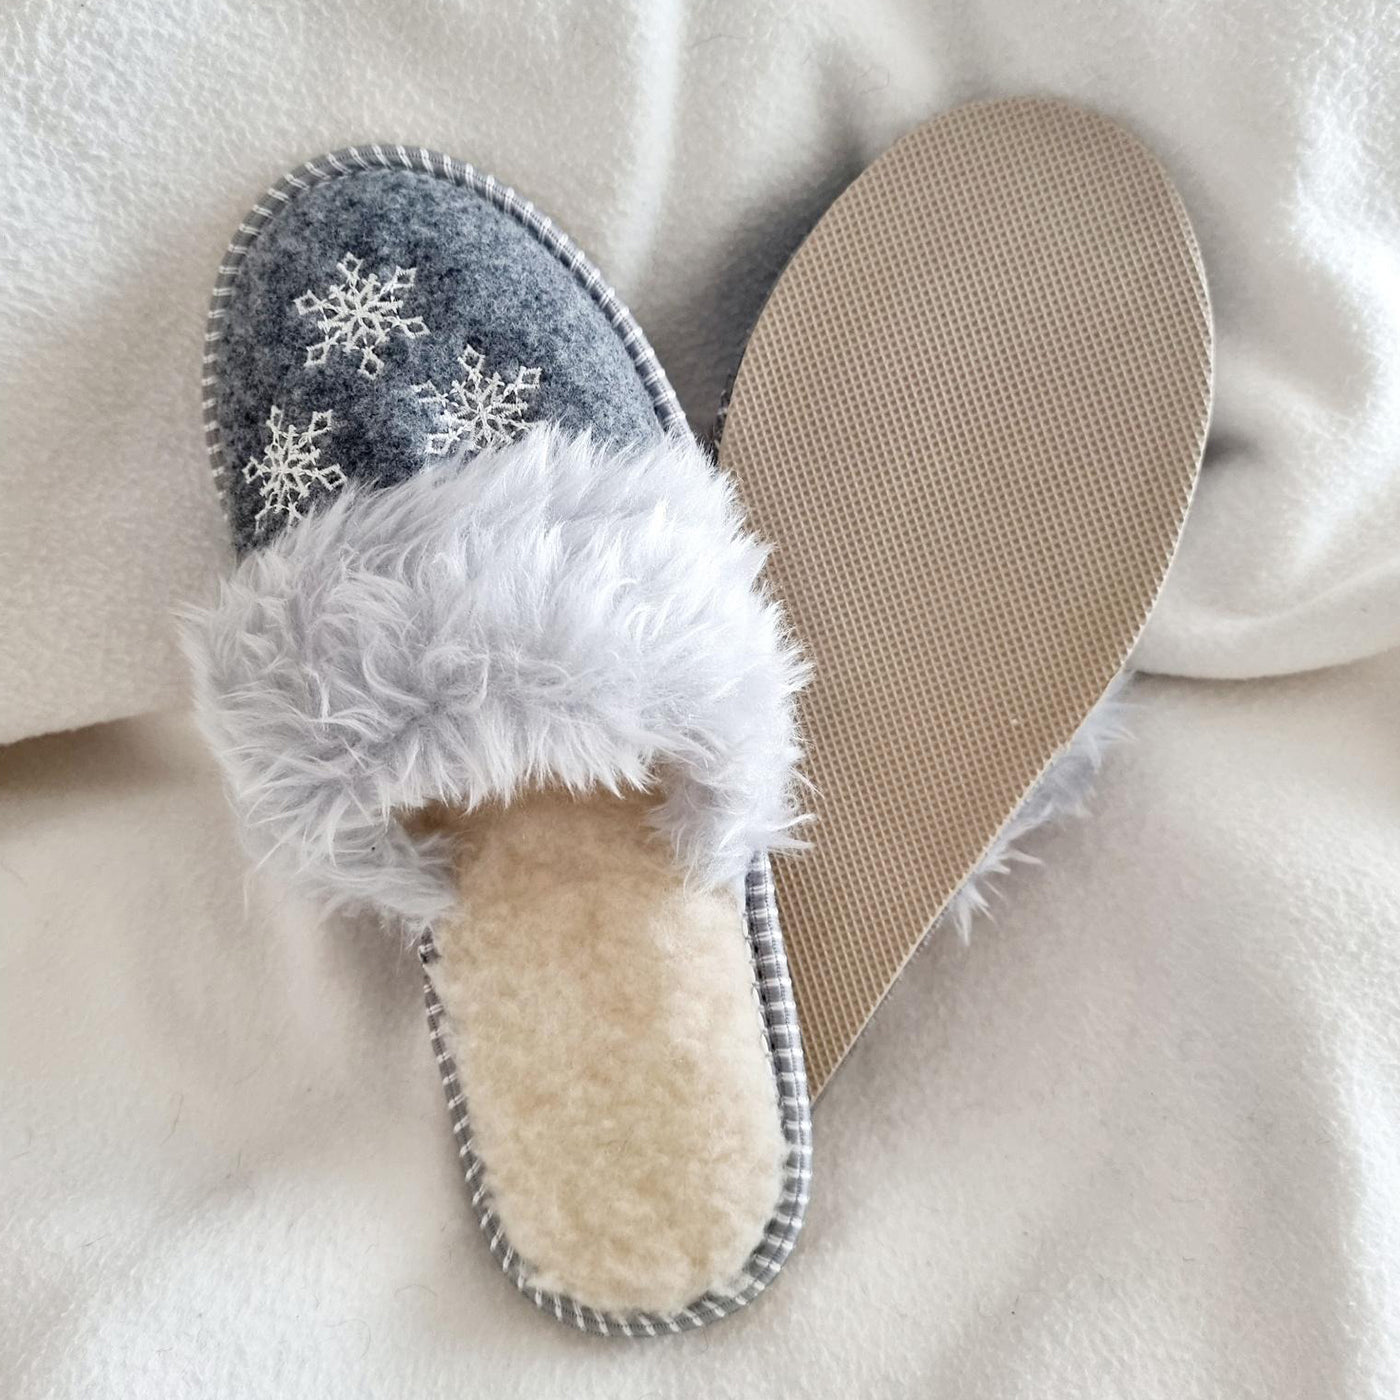 Warm Felt Slippers with Sheep Wool SNOW